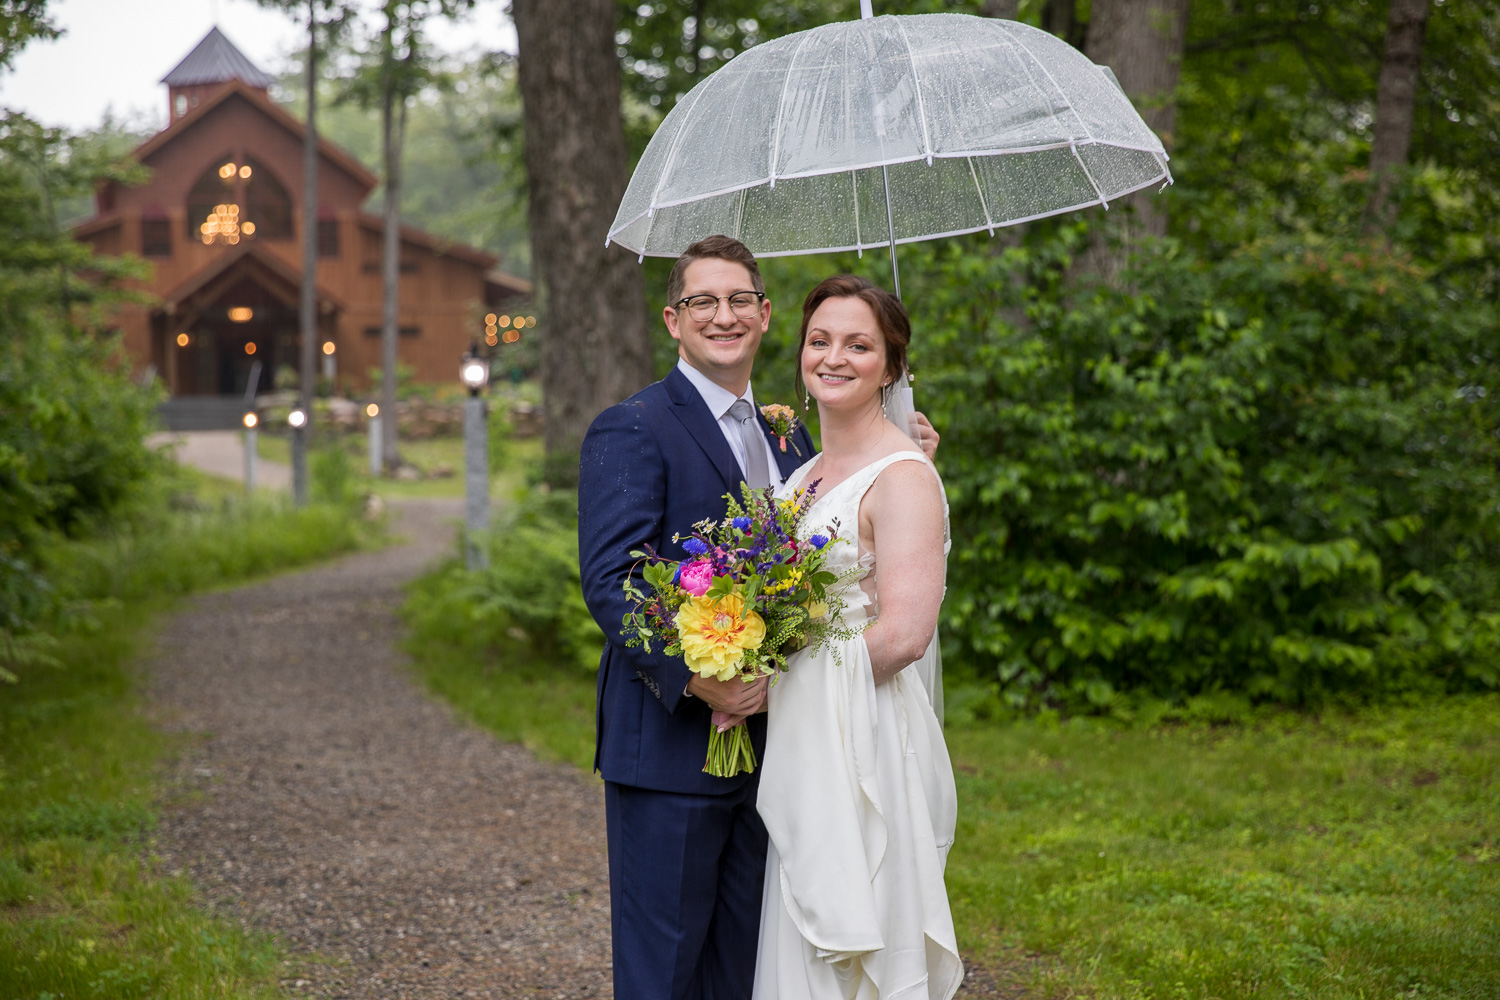 Bride and groom standing under umbrella in front of the barn at Old Saco Inn at their meadow wedding